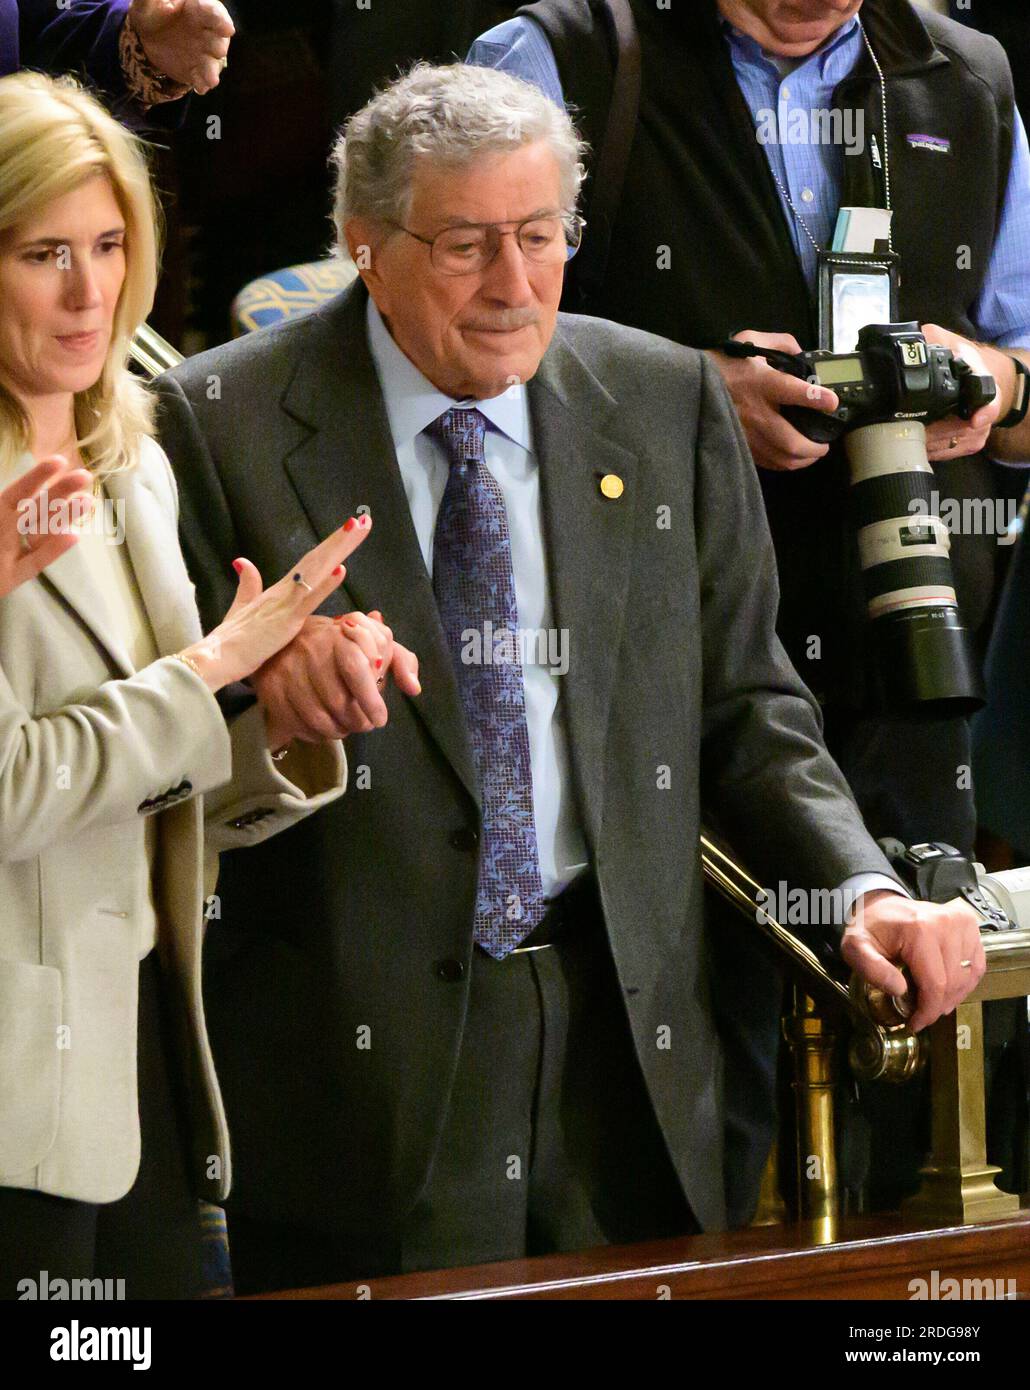 Singer Tony Bennett, a guest of Speaker of the United States House of Representatives Nancy Pelosi (Democrat of California), stands in the gallery as the 116th Congress convenes for its opening session in the US House Chamber of the US Capitol in Washington, DC on Thursday, January 3, 2019. Credit: Ron Sachs / CNP (RESTRICTION: NO New York or New Jersey Newspapers or newspapers within a 75 mile radius of New York City) Stock Photo